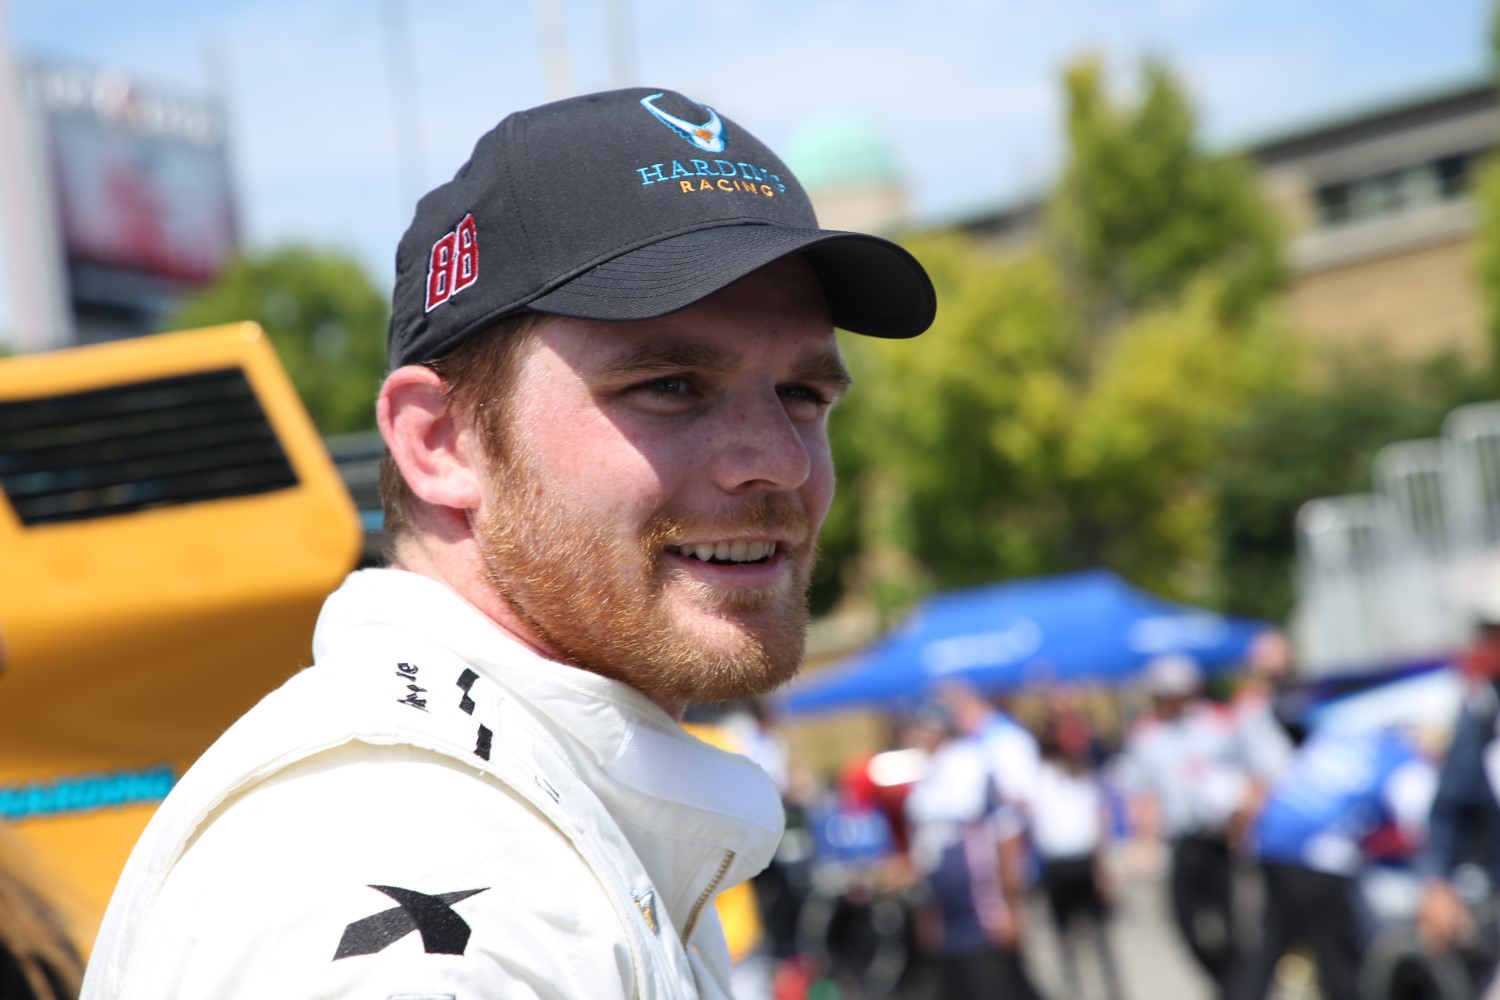 Conor Daly again backed by the Air Force